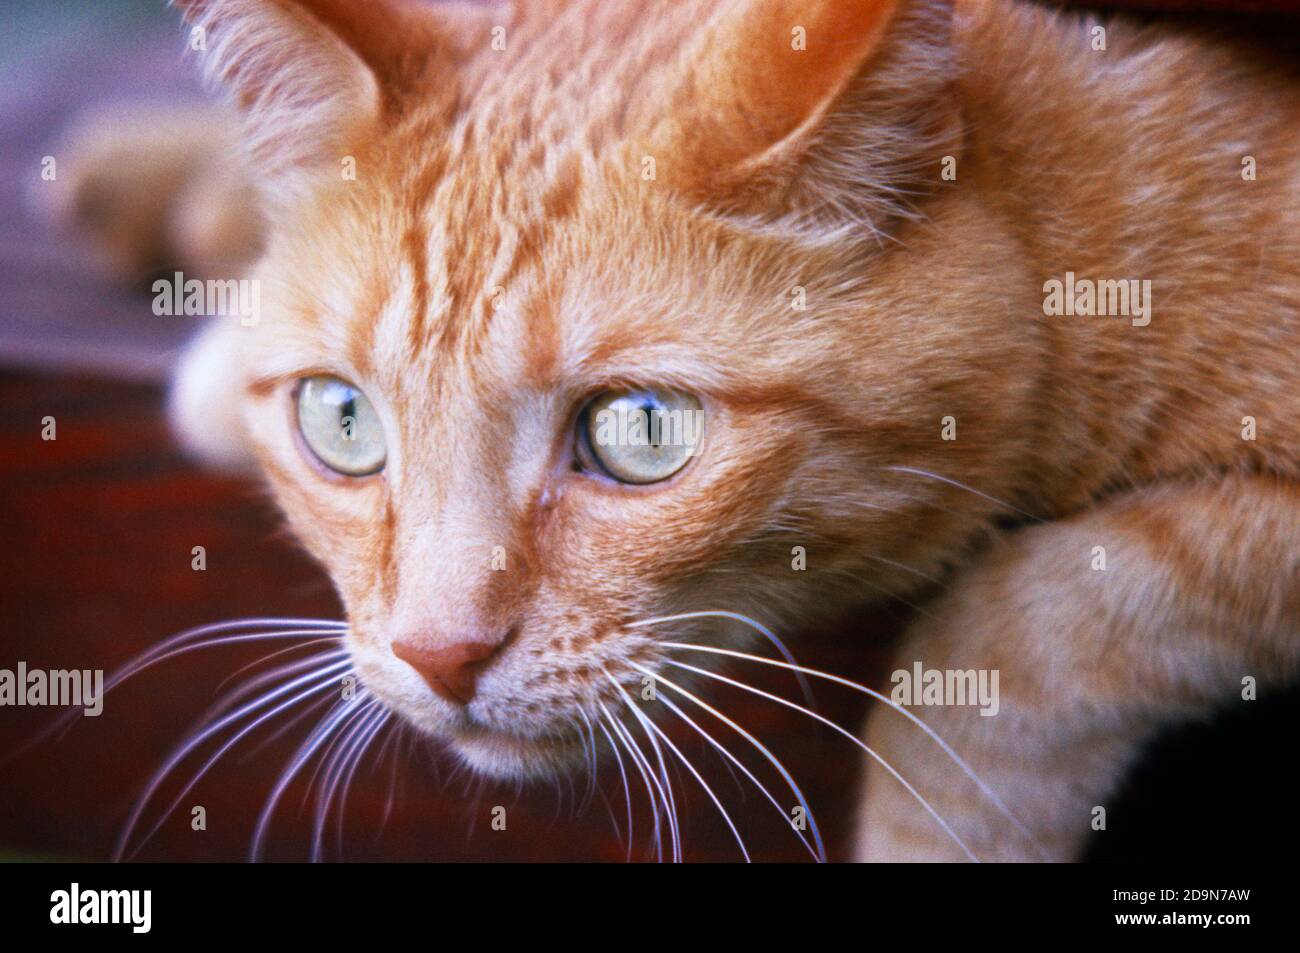 1970s FACE OF DOMESTIC ORANGE TABBY CAT WITH DISTINCTIVE M SHAPED MARKING ON FOREHEAD PINK NOSE WHISKERS EYES FIXED ON ALERT - kc8201 GER002 HARS INTENT M MARKING OLD FASHIONED Stock Photo